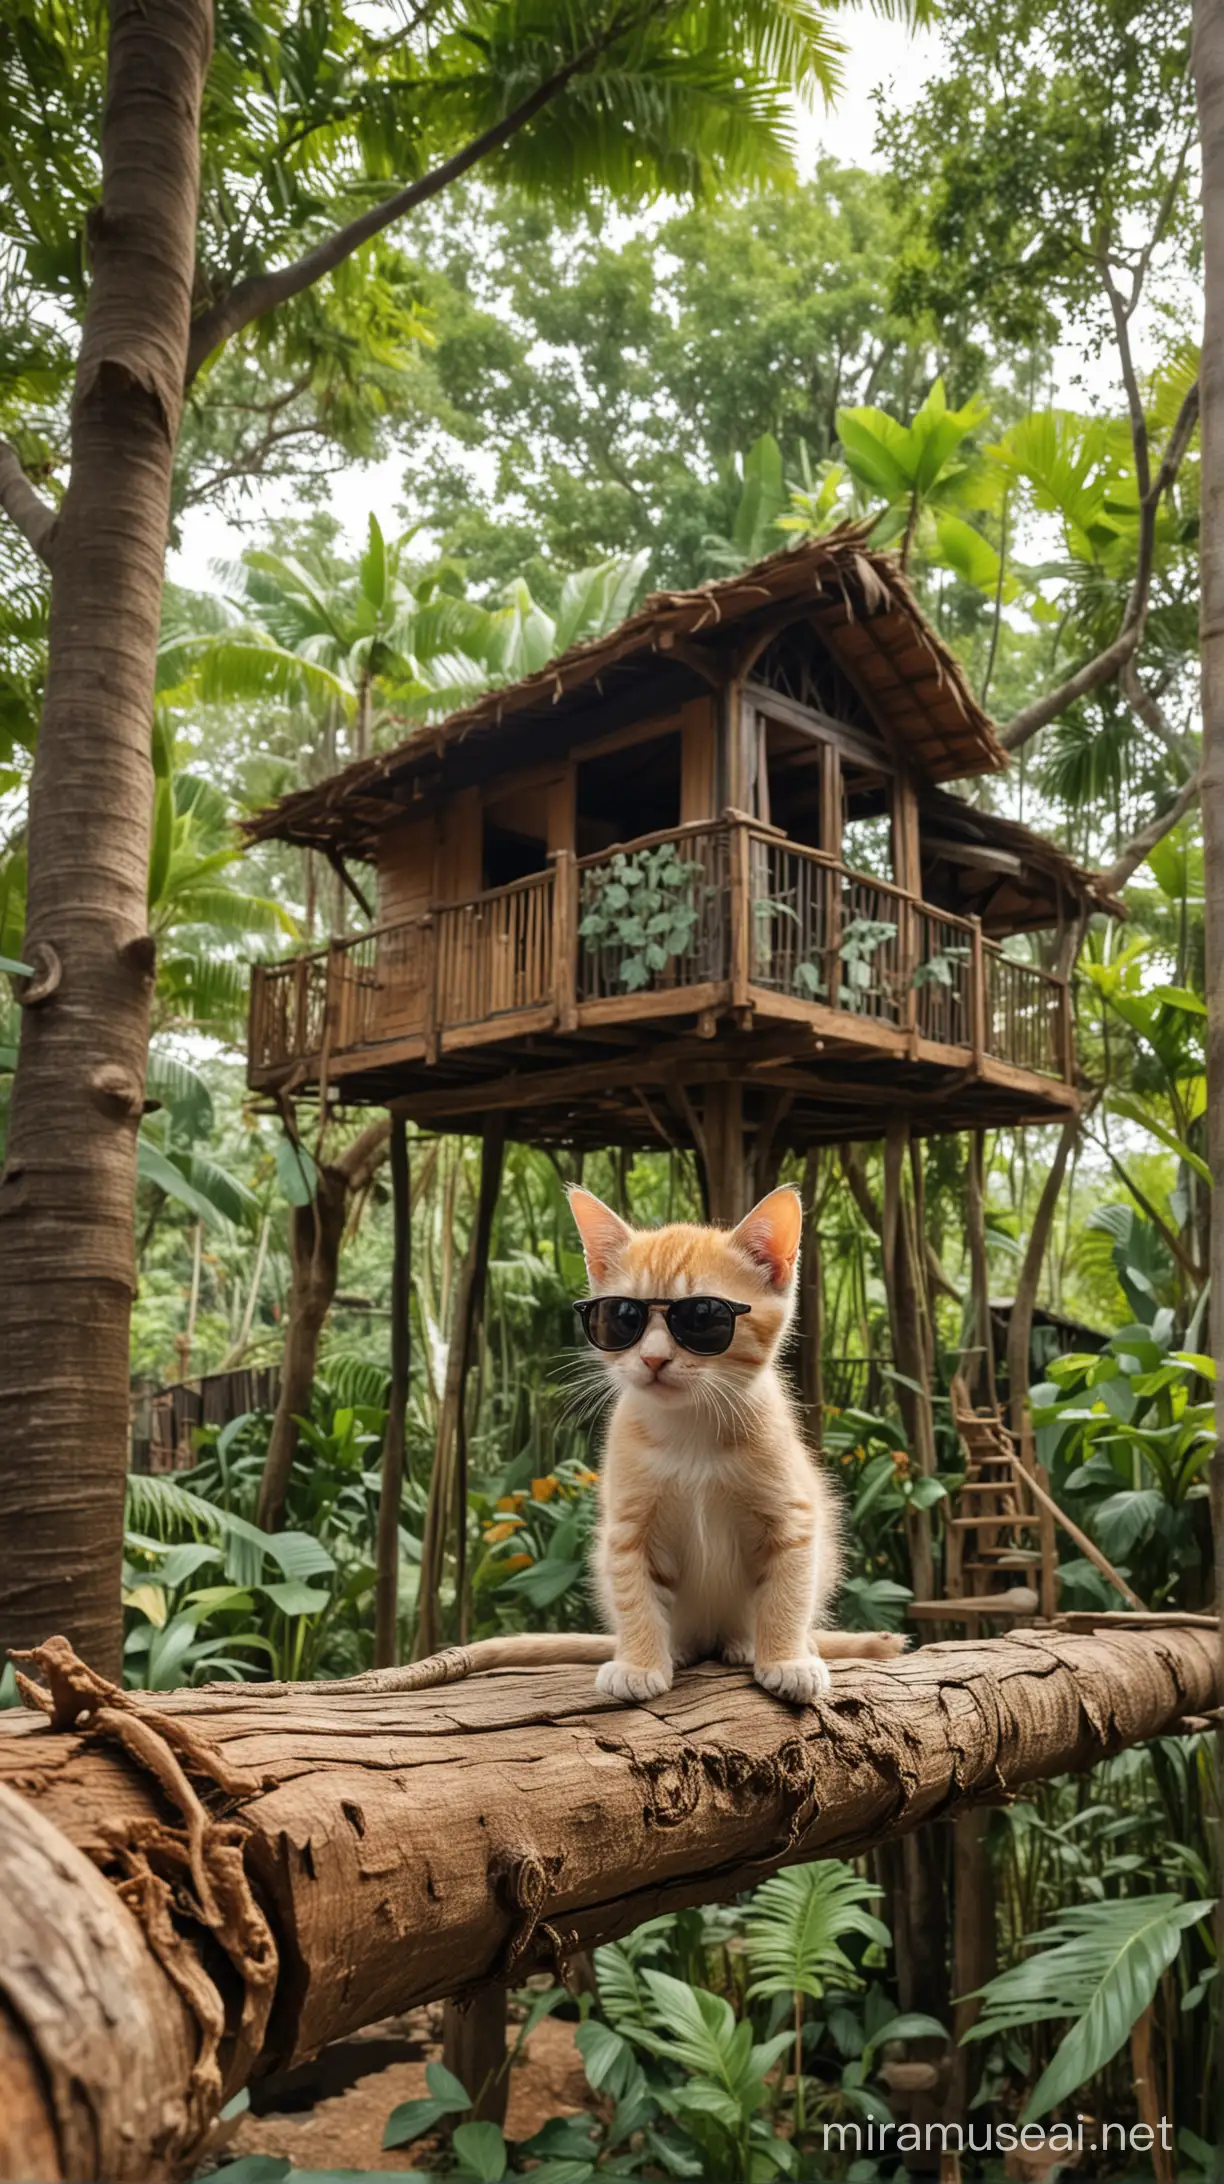 Smiling Kitten in Balis Enchanting Jungle Treehouse with Playful Monkeys